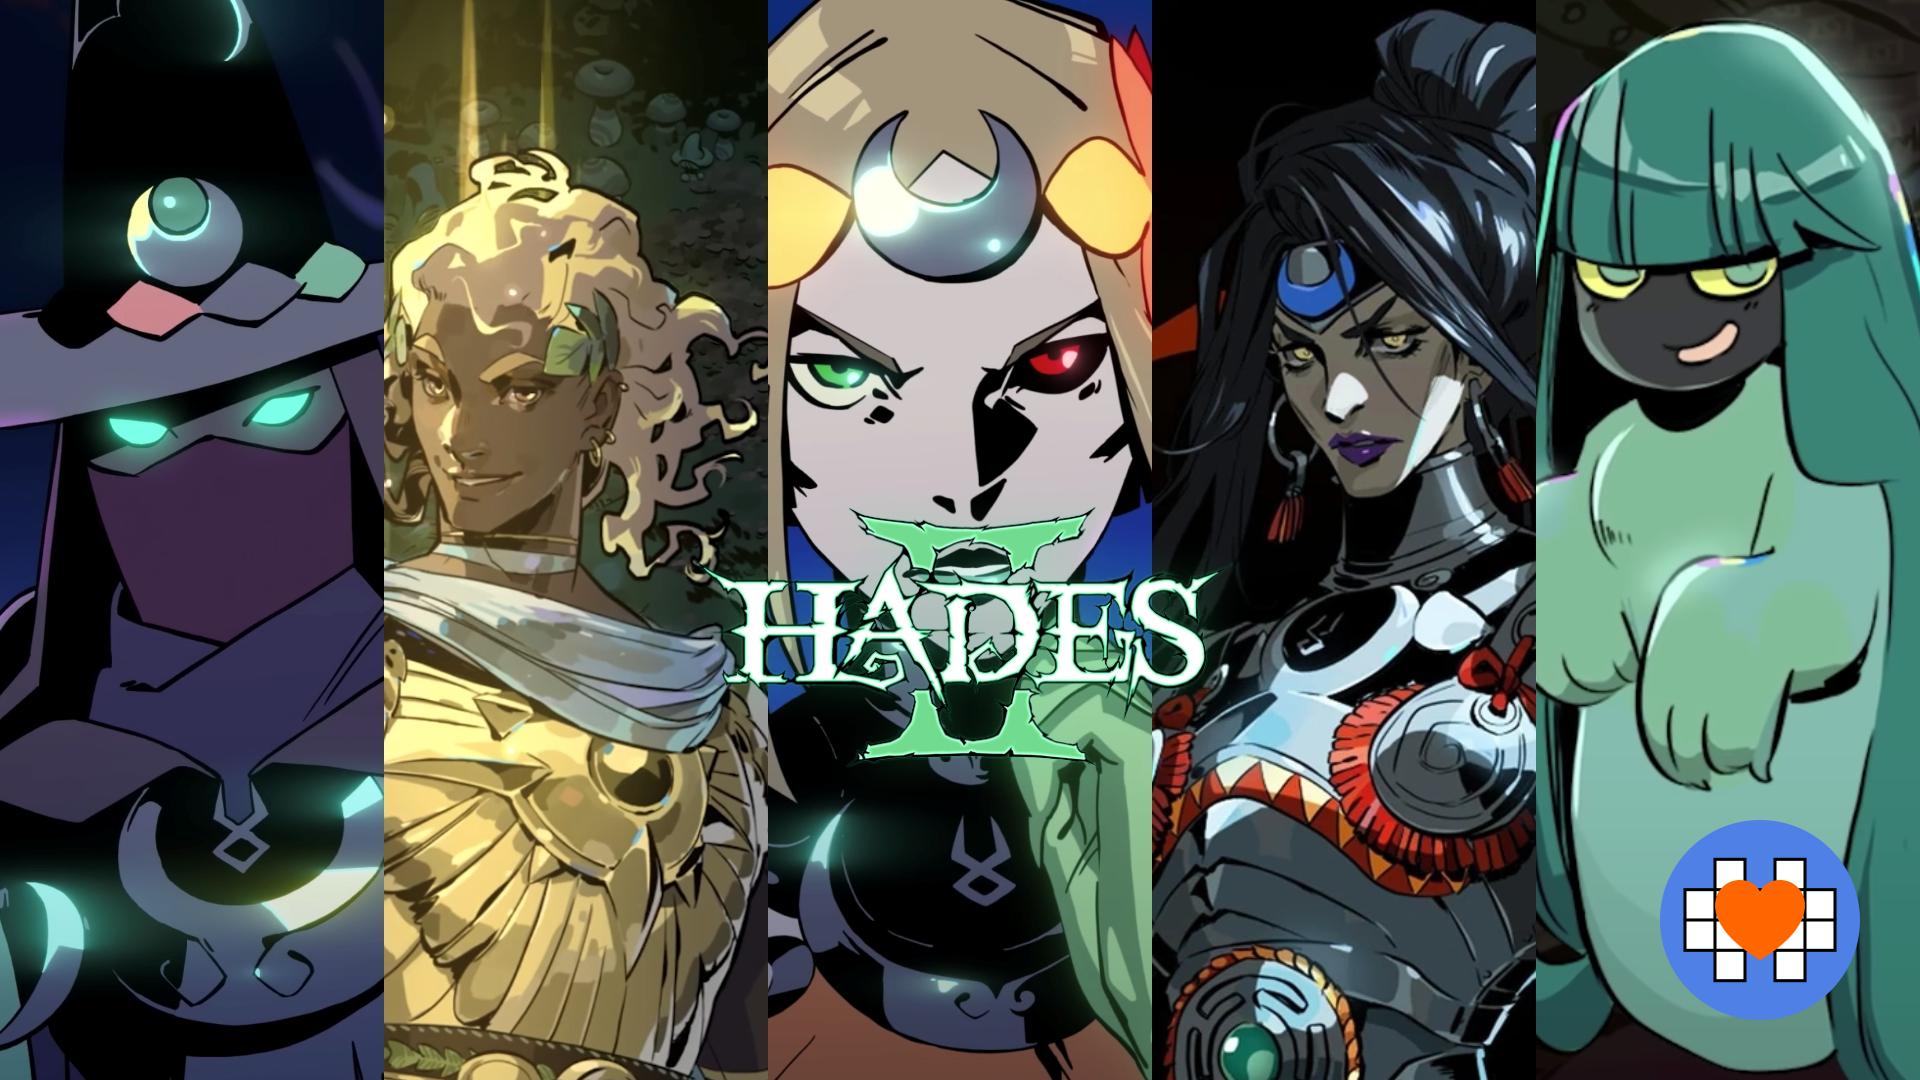 All Hades 2 characters revealed so far